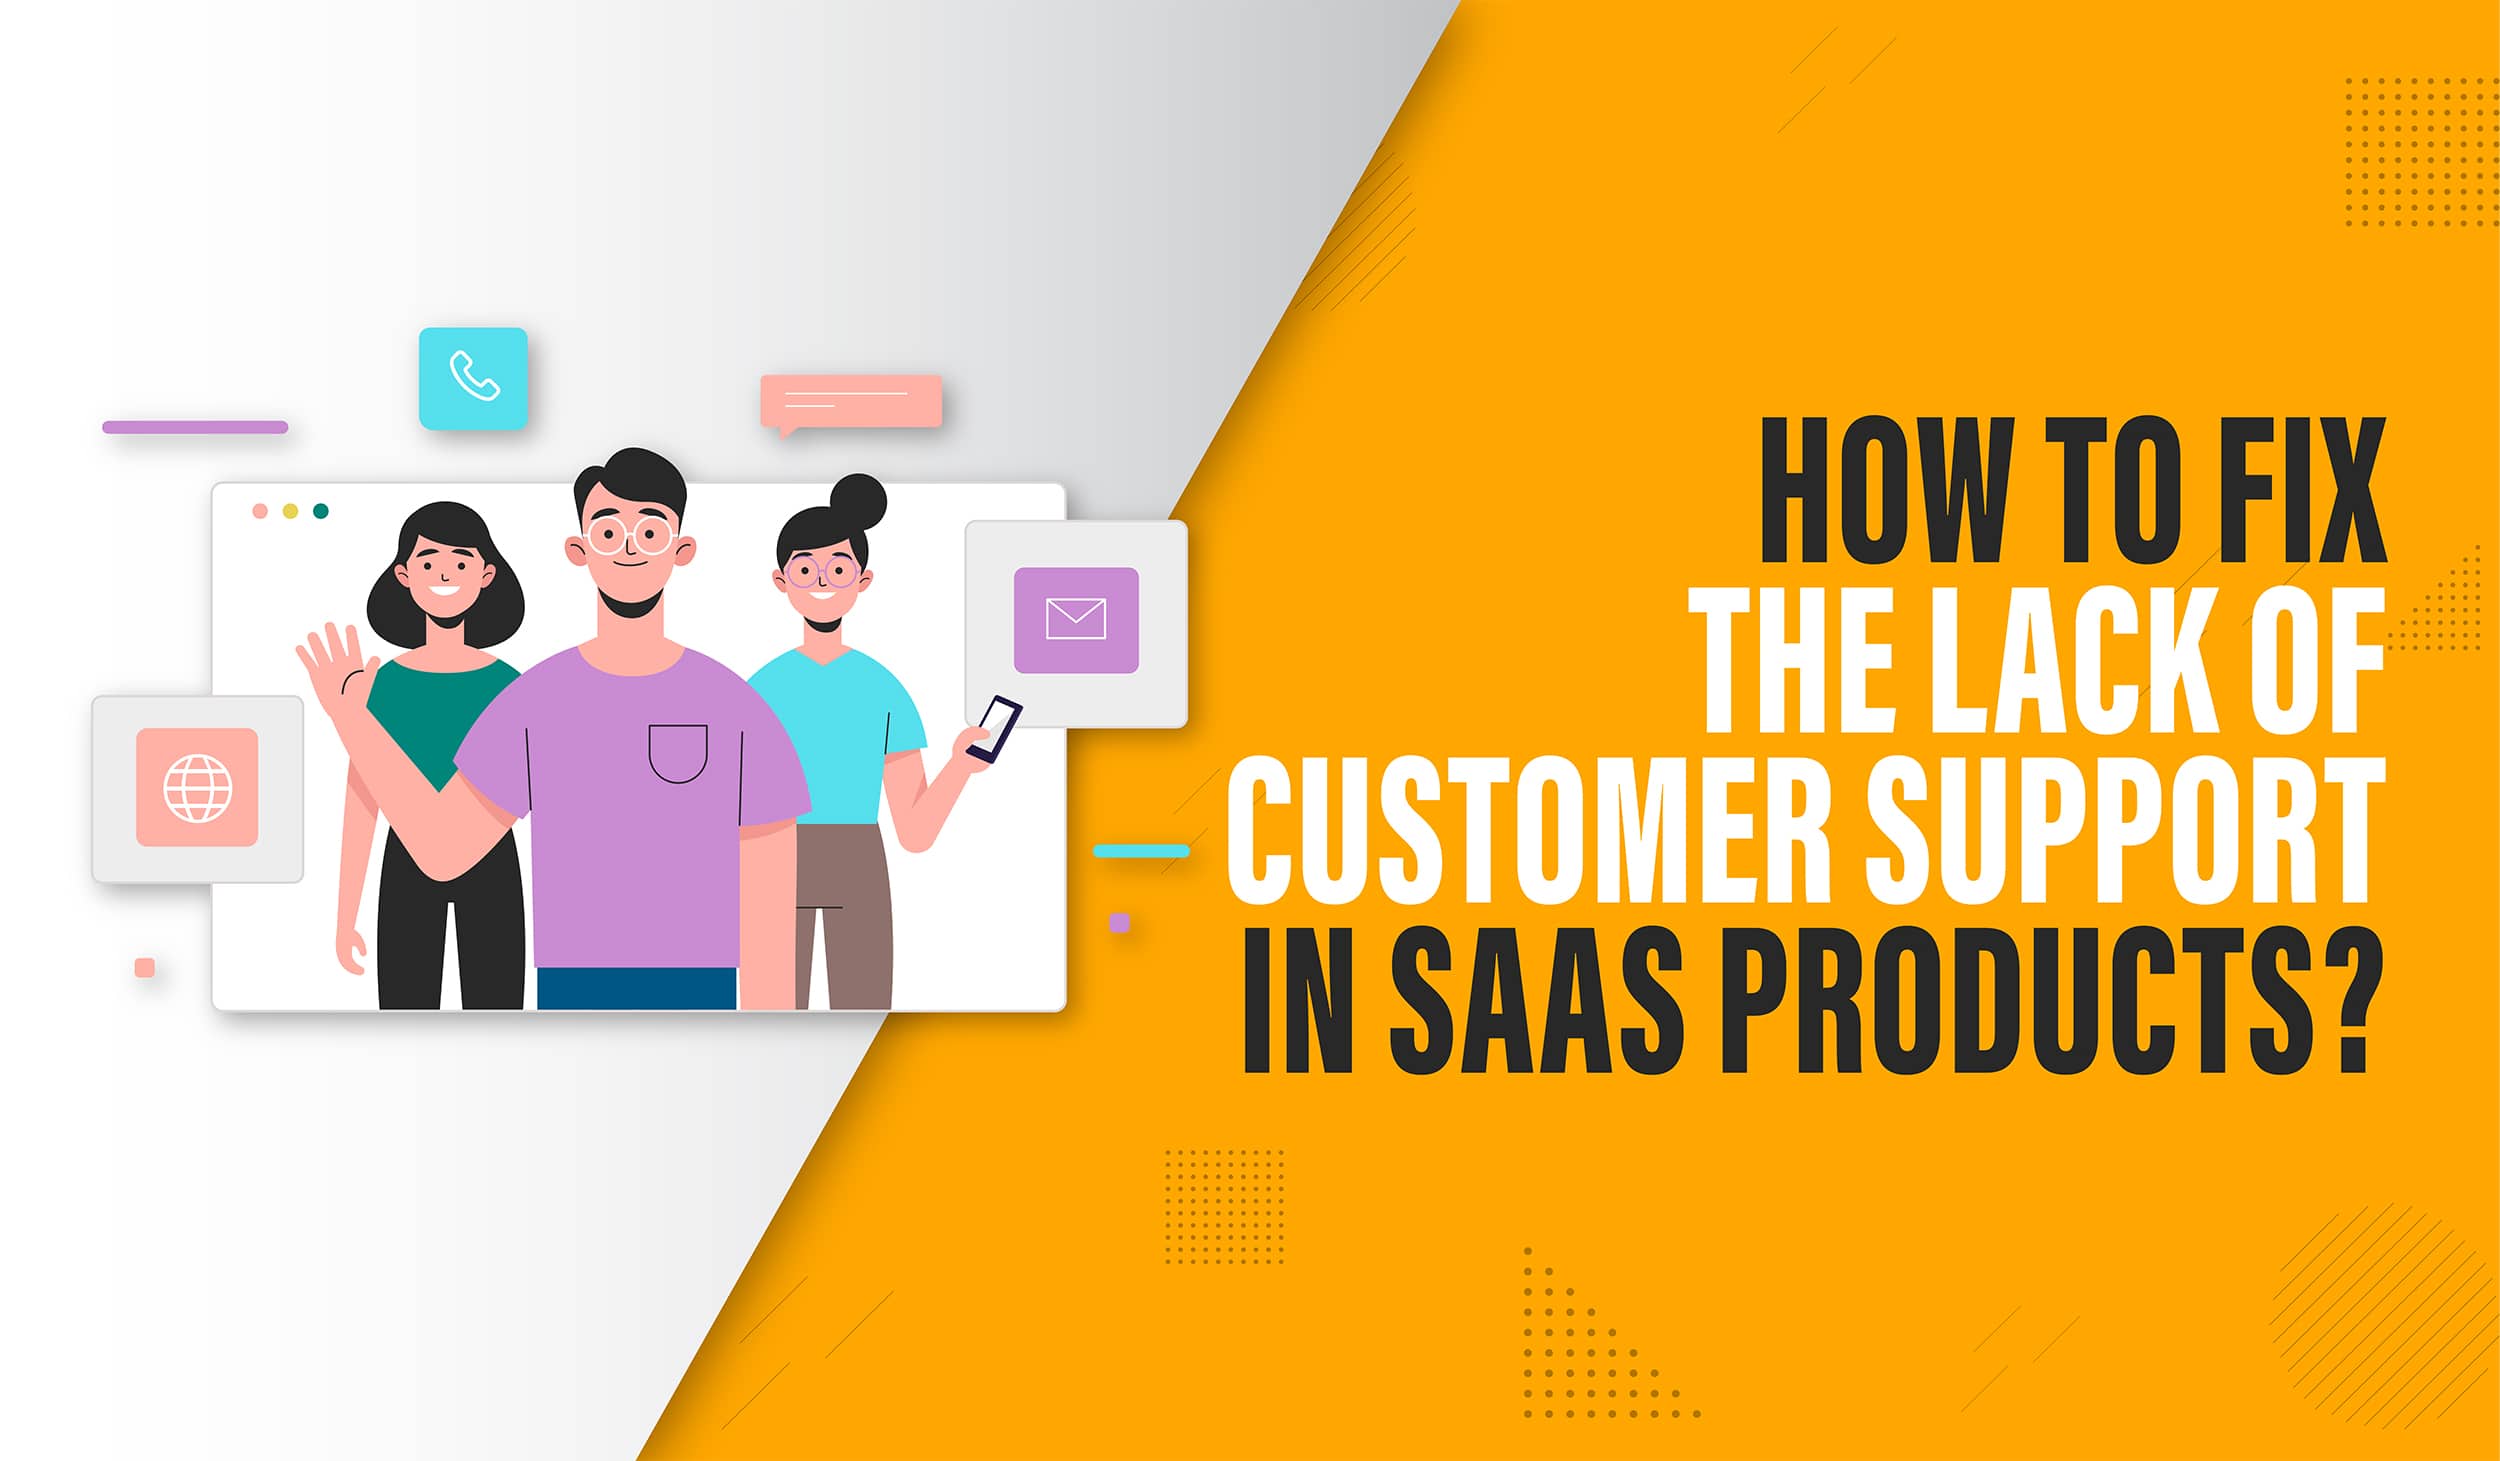 17 How to fix the lack of customer support in SaaS products